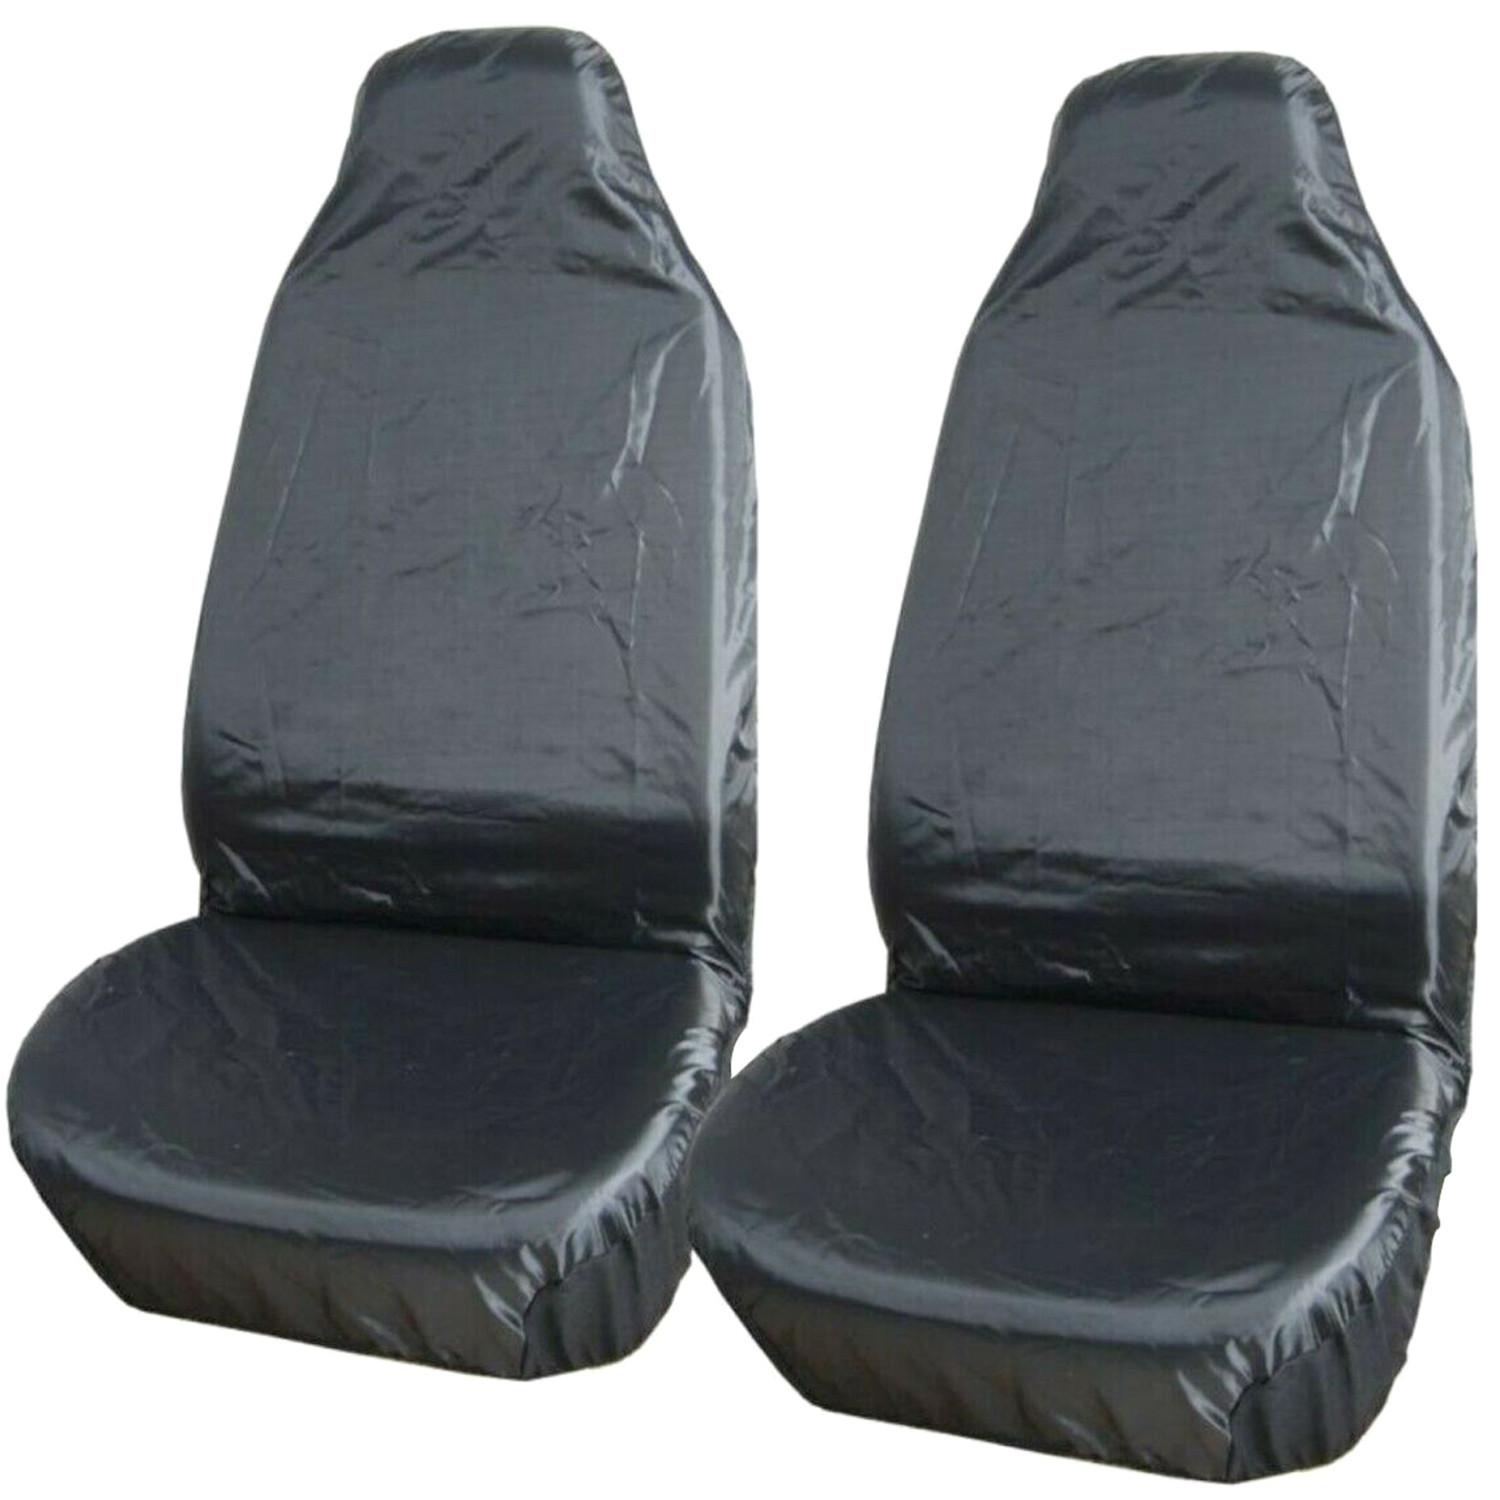 Nylon Front Seat Covers 2 Pack Image